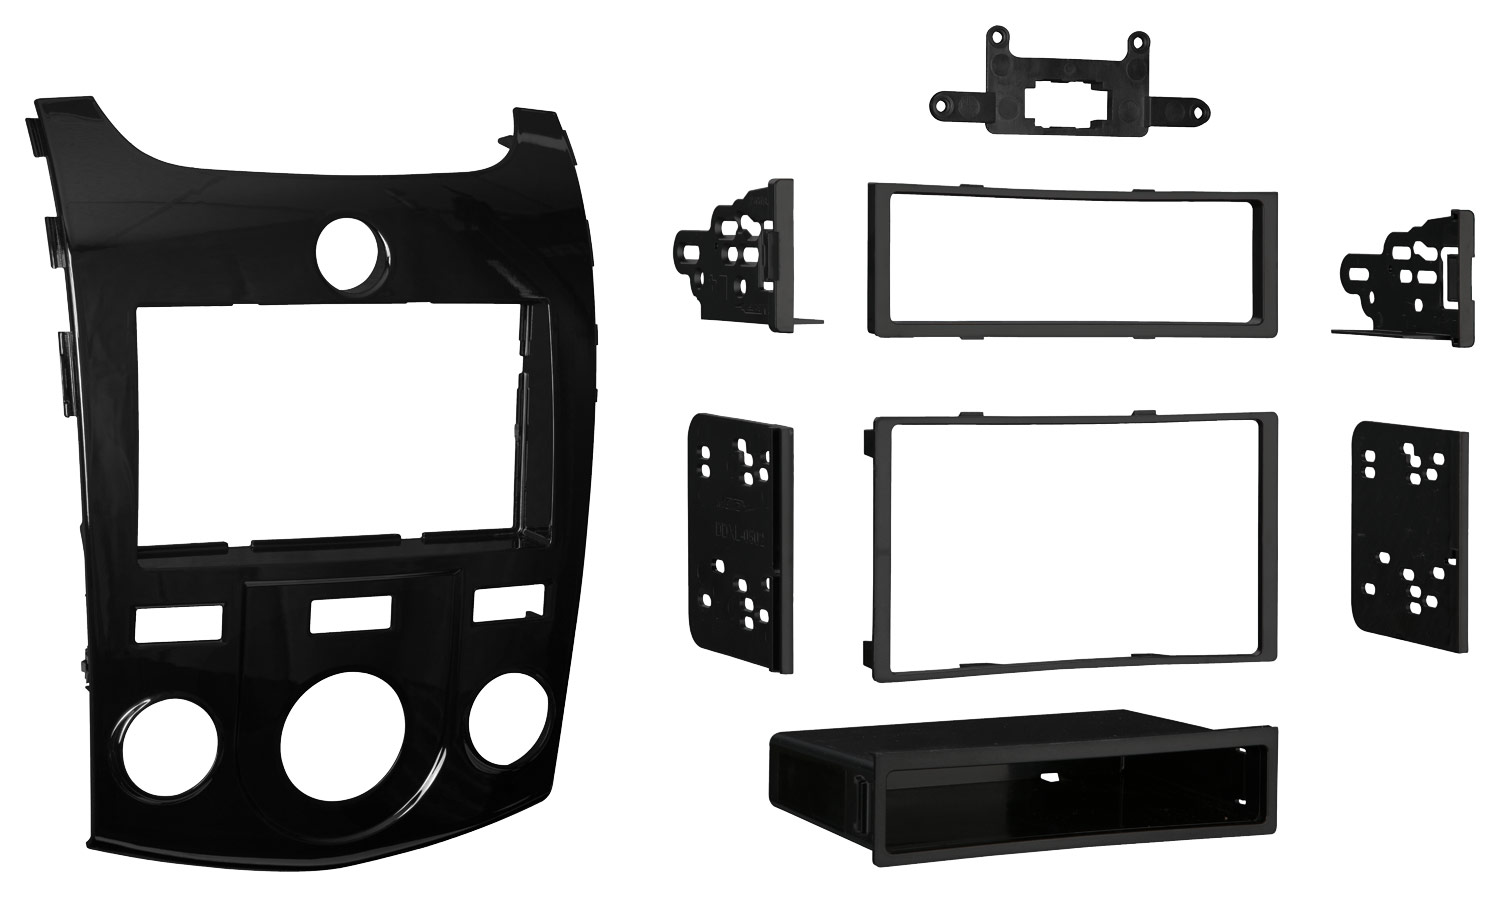 Metra - Installation Kit for Most 2010 and later Kia Forte and Forte Koup Vehicles - High-Gloss Black was $49.99 now $37.49 (25.0% off)